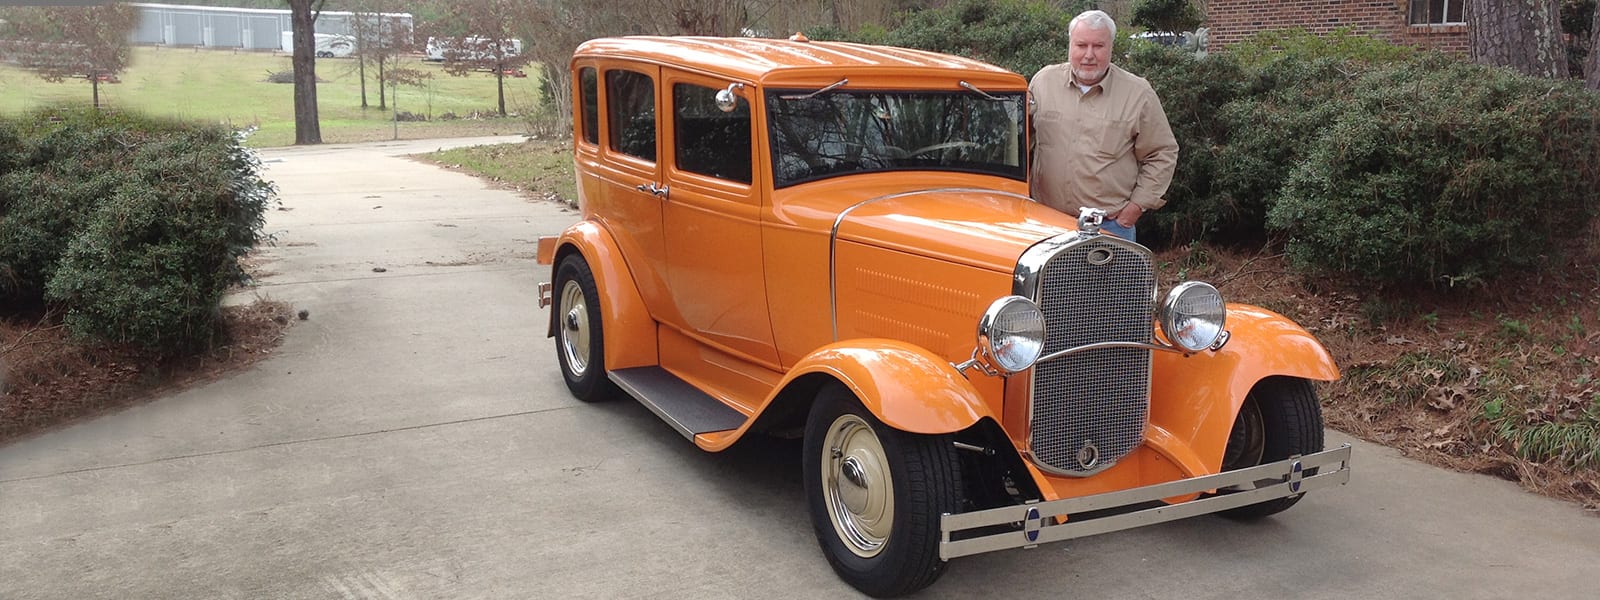 1931 Ford Model A, Ron Swaggart